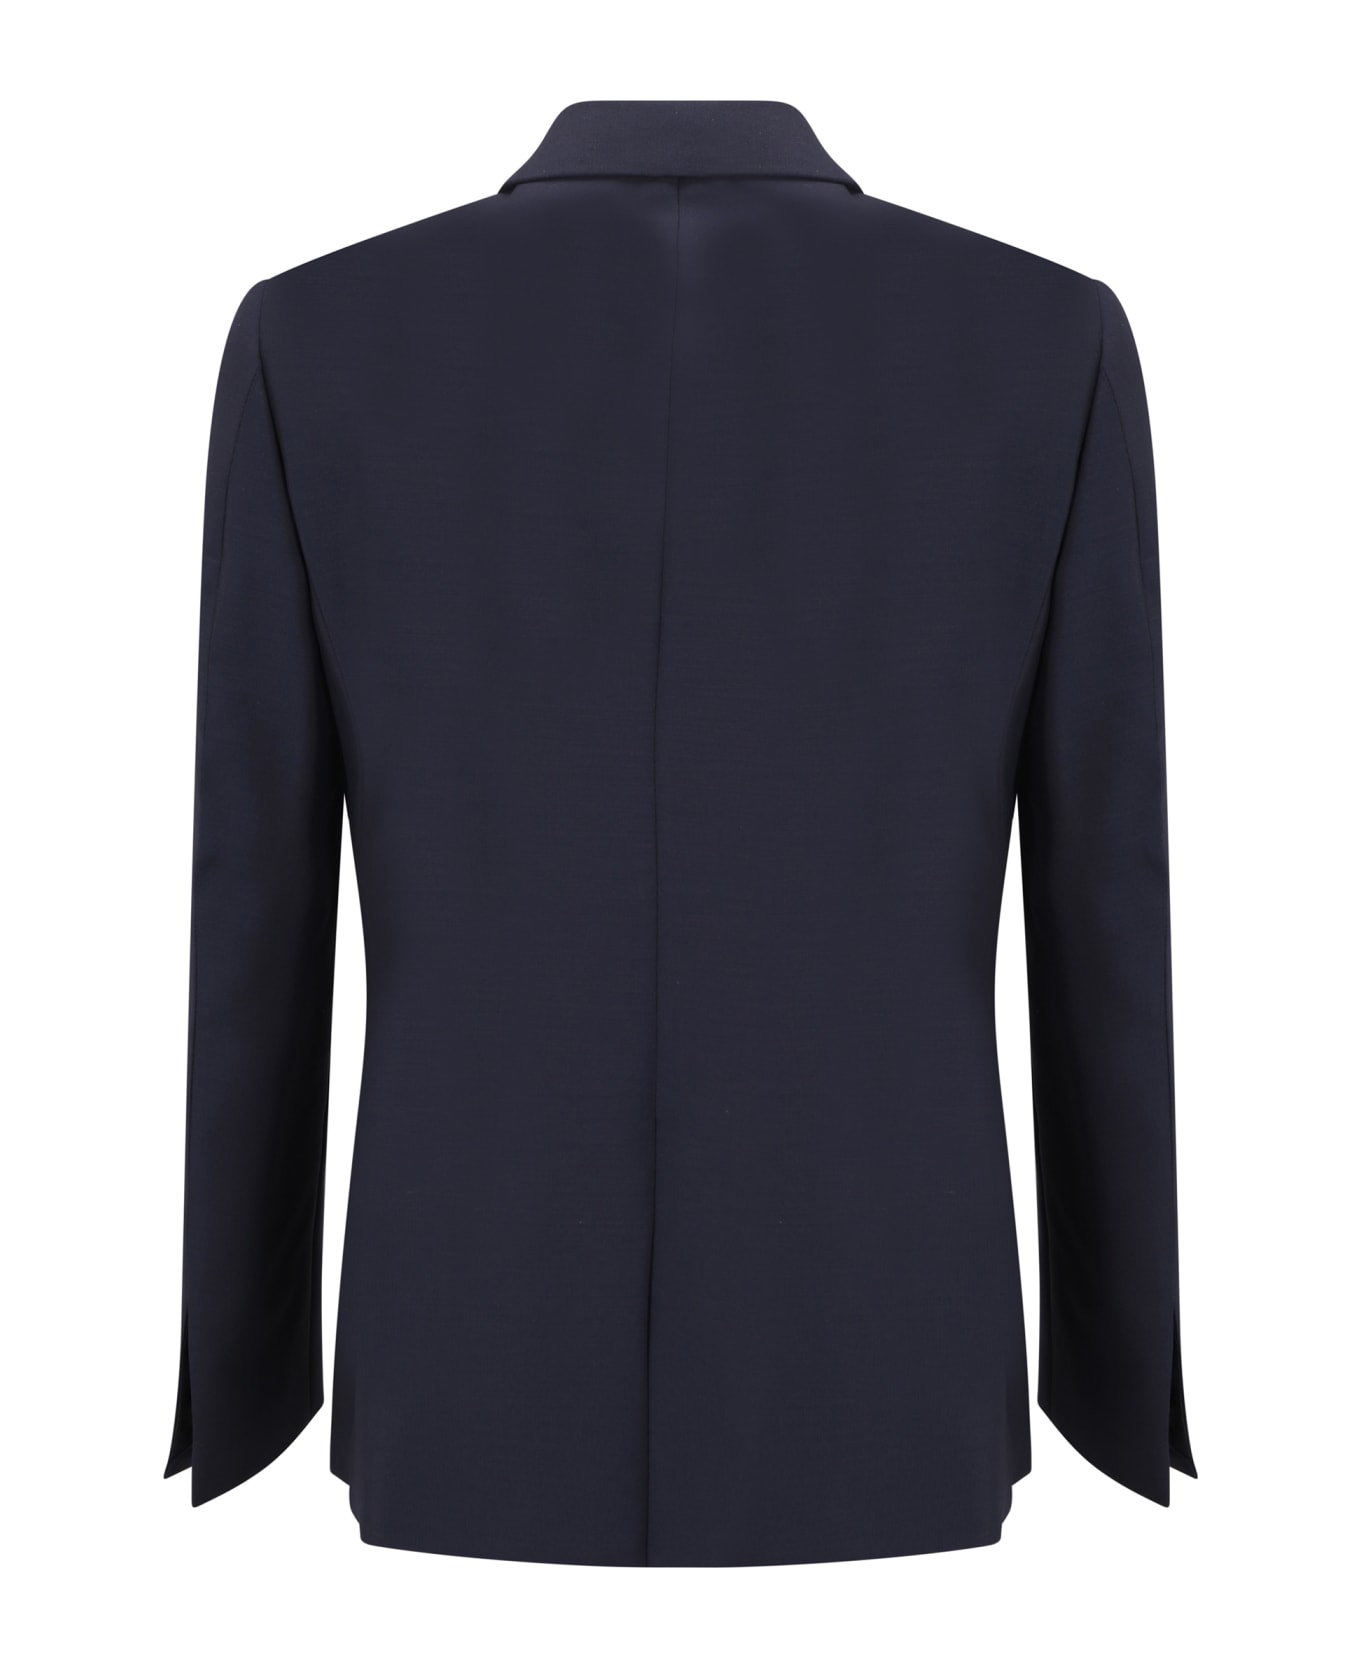 Givenchy Wool Blend Single-breast Jacket - blue ブレザー